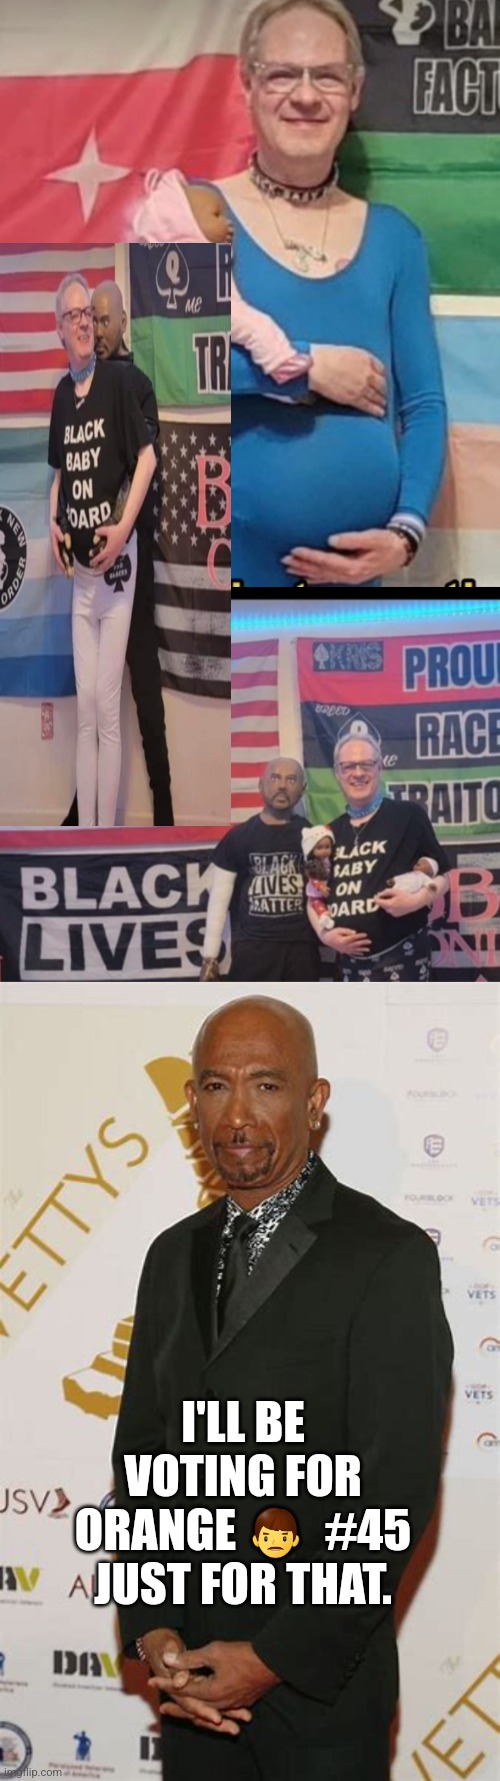 Average white male blm supporter | I'LL BE VOTING FOR ORANGE 👨  #45 JUST FOR THAT. | image tagged in blm,sleepy joe,montel,tv | made w/ Imgflip meme maker